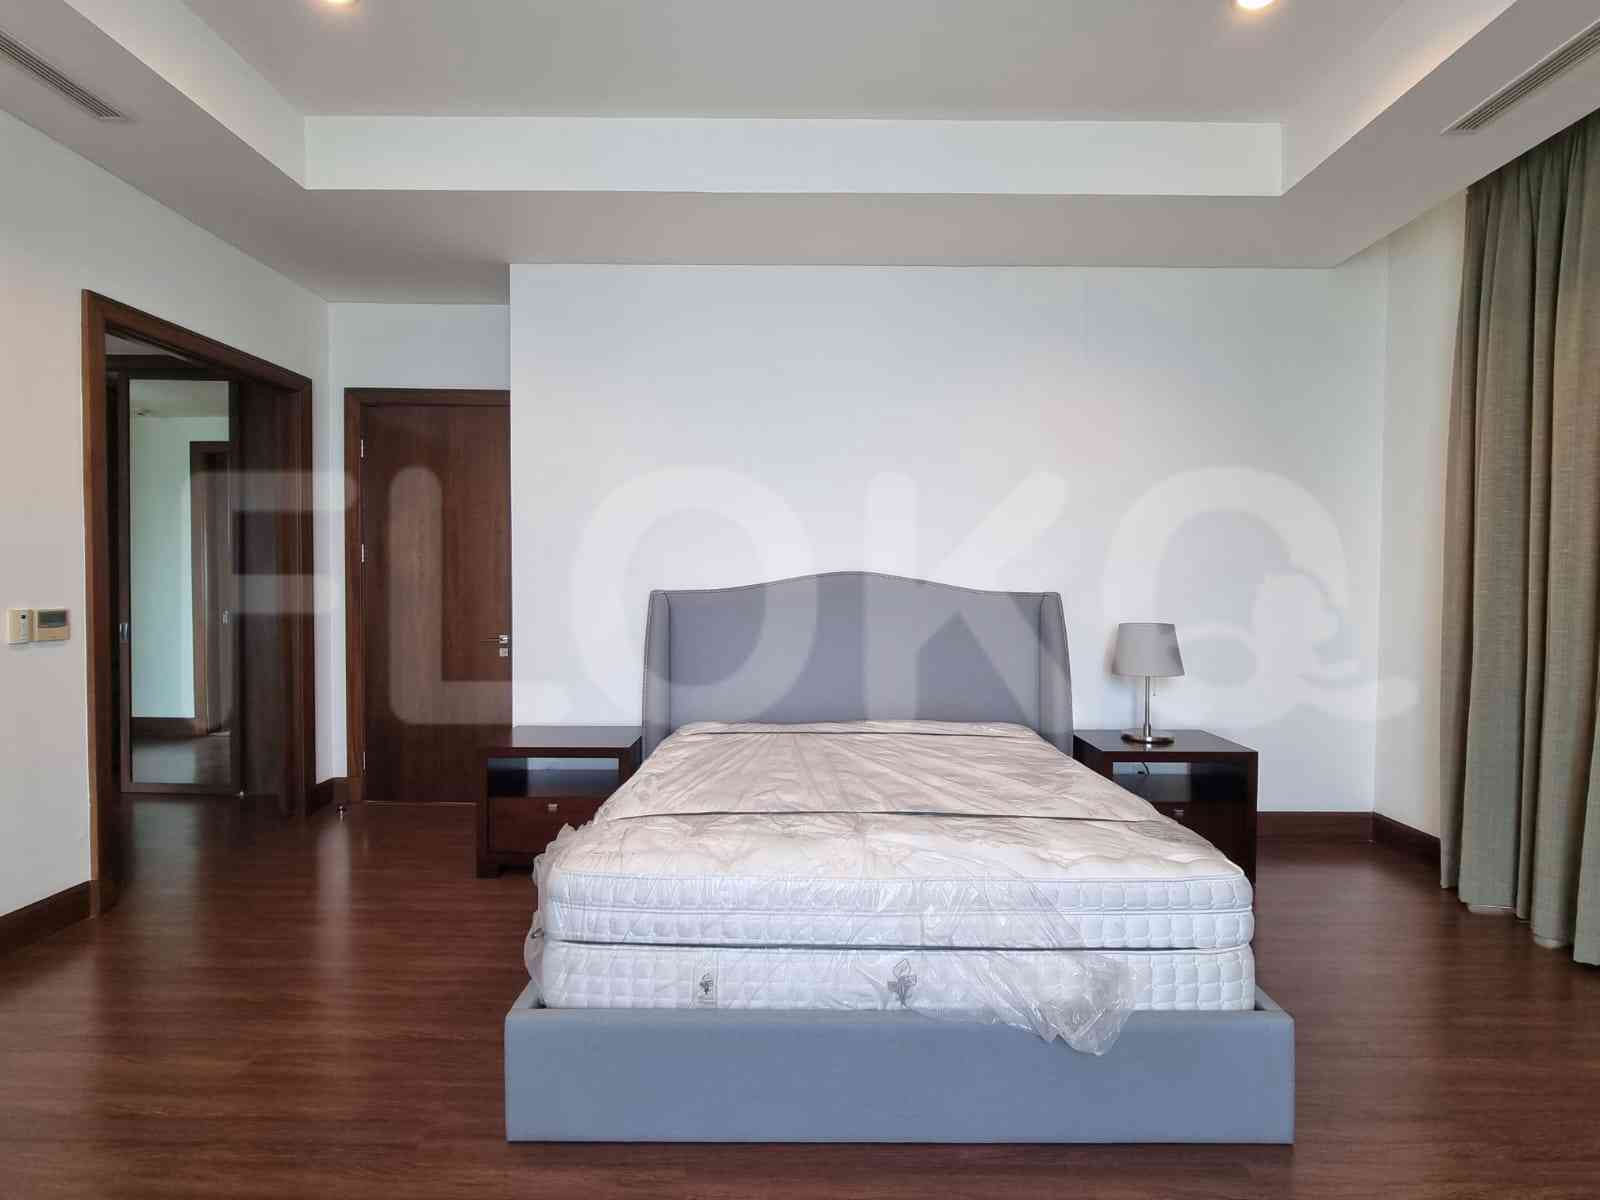 4 Bedroom on 15th Floor for Rent in The Pakubuwono Signature - fga184 4